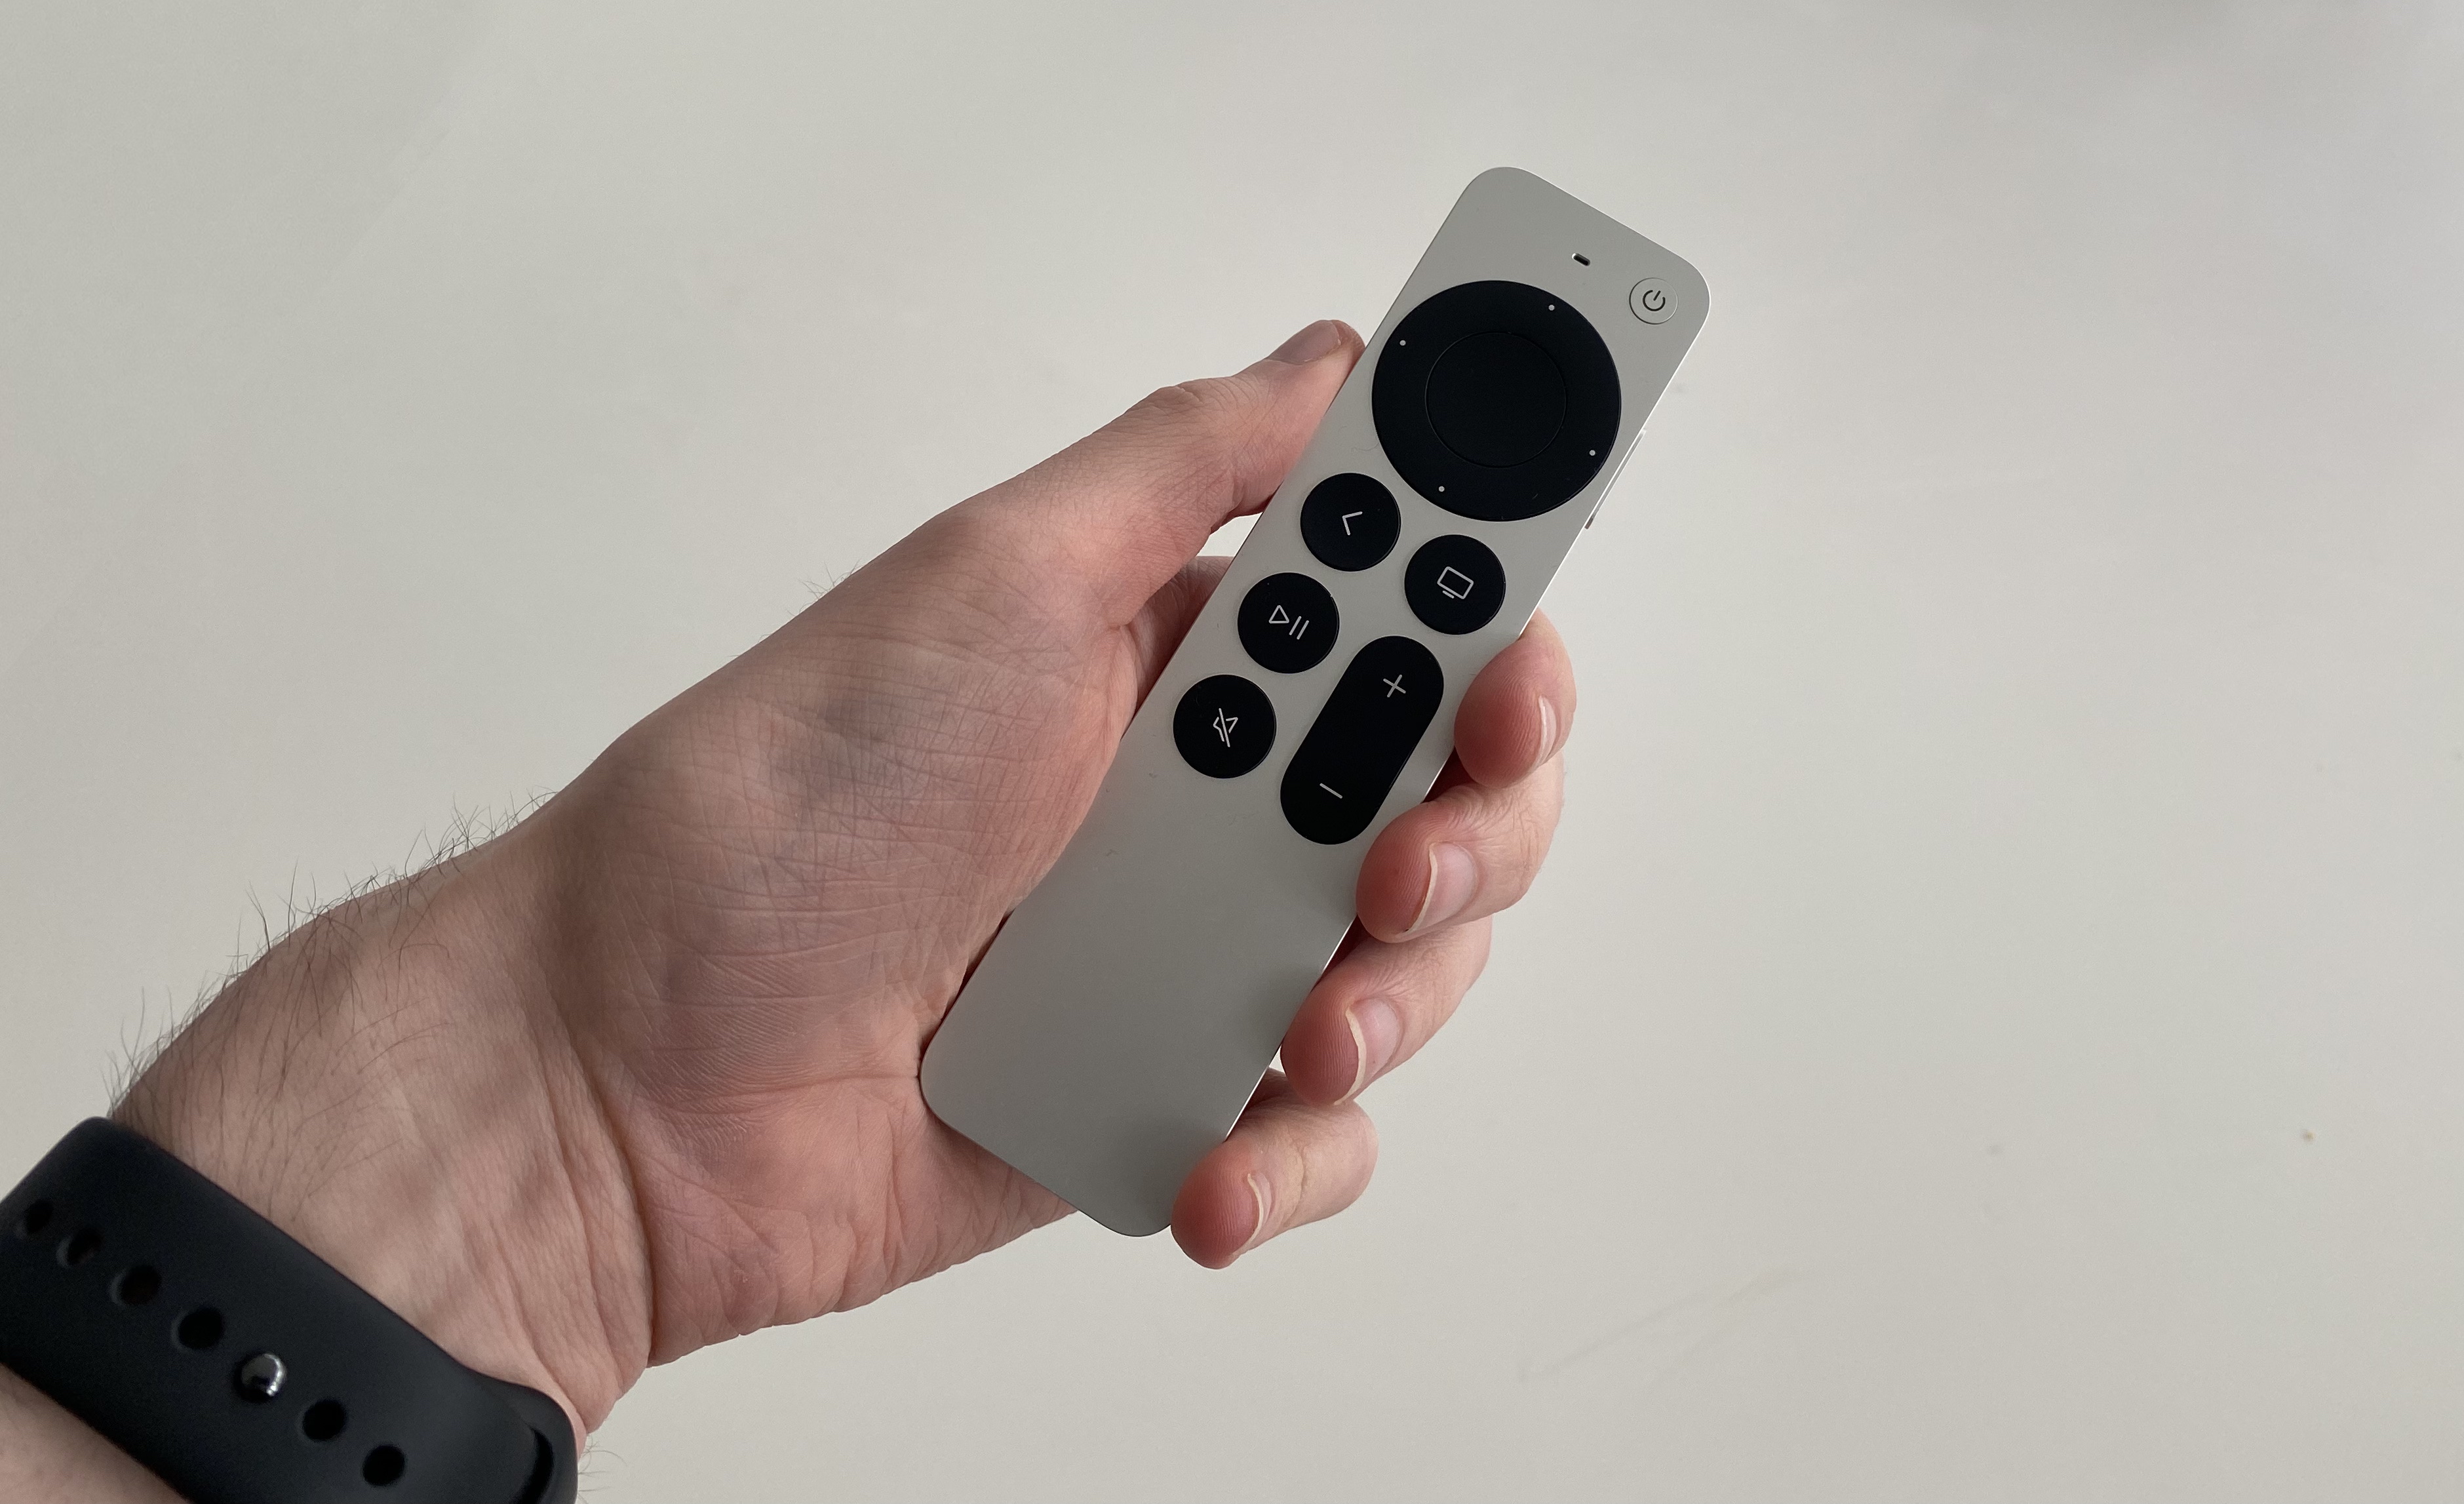 Apple TV remote not working? How to unpair and reset your Apple TV